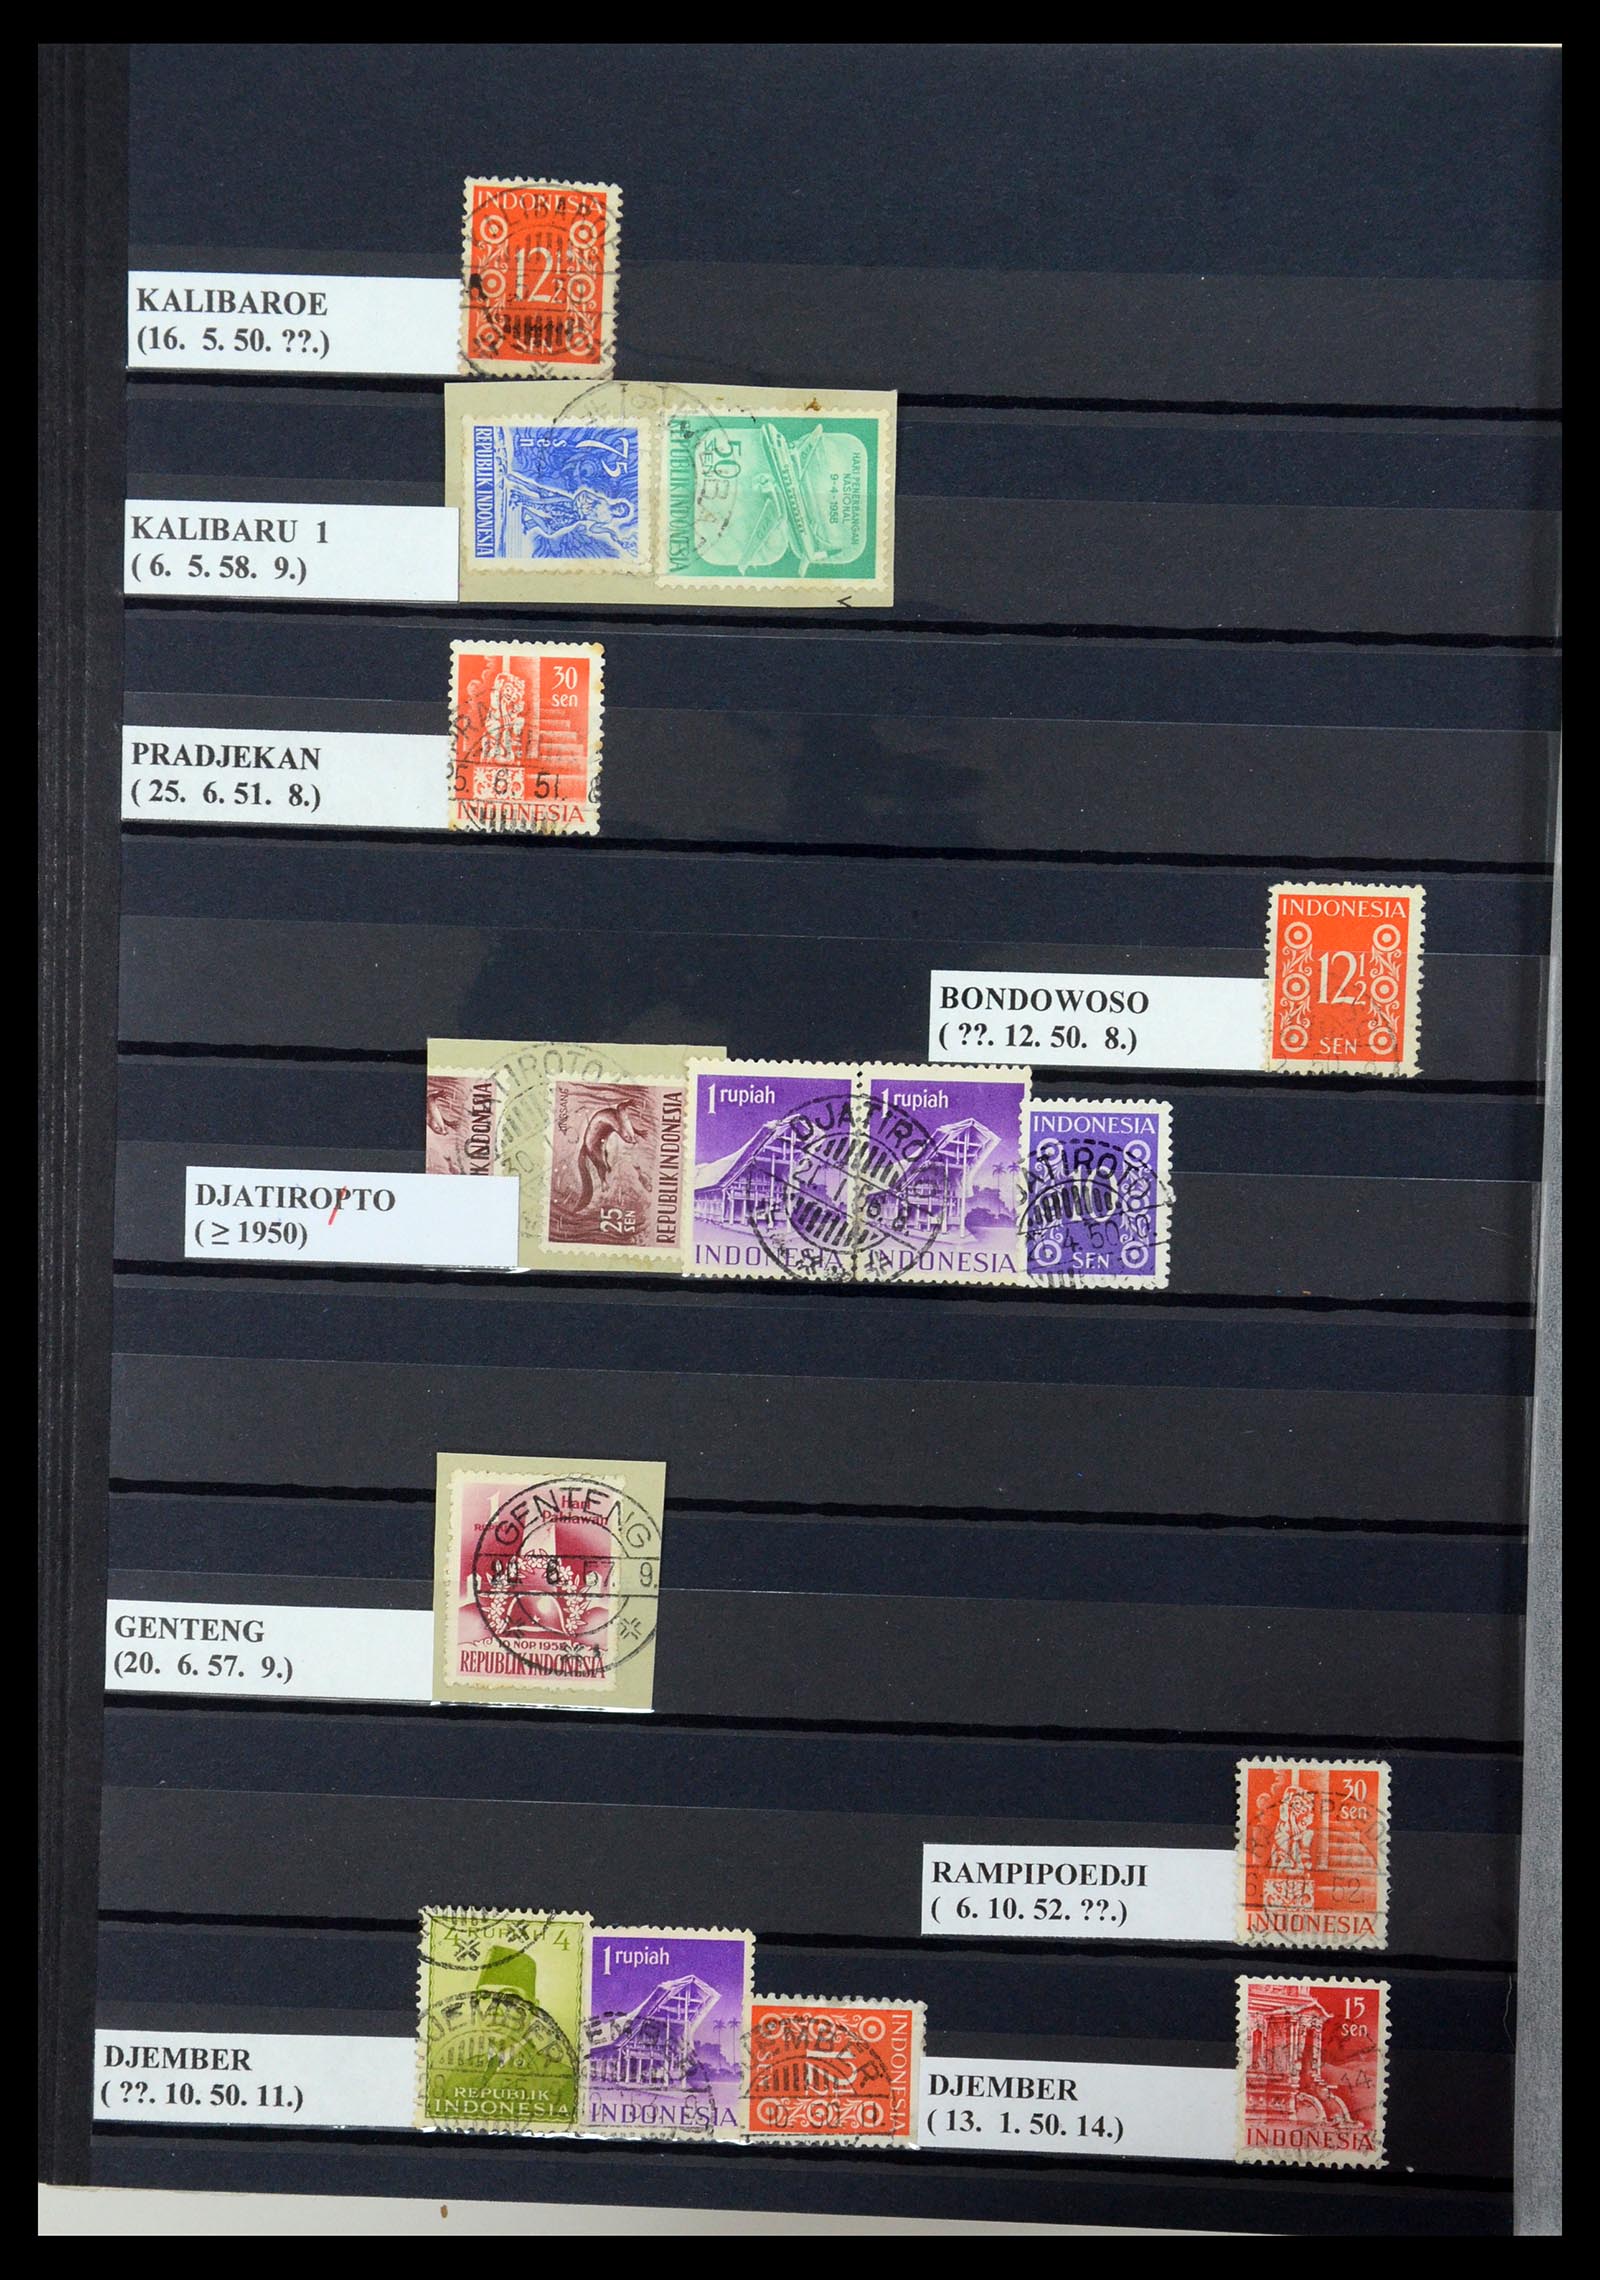 35612 105 - Stamp Collection 35612 Dutch east Indies cancels.